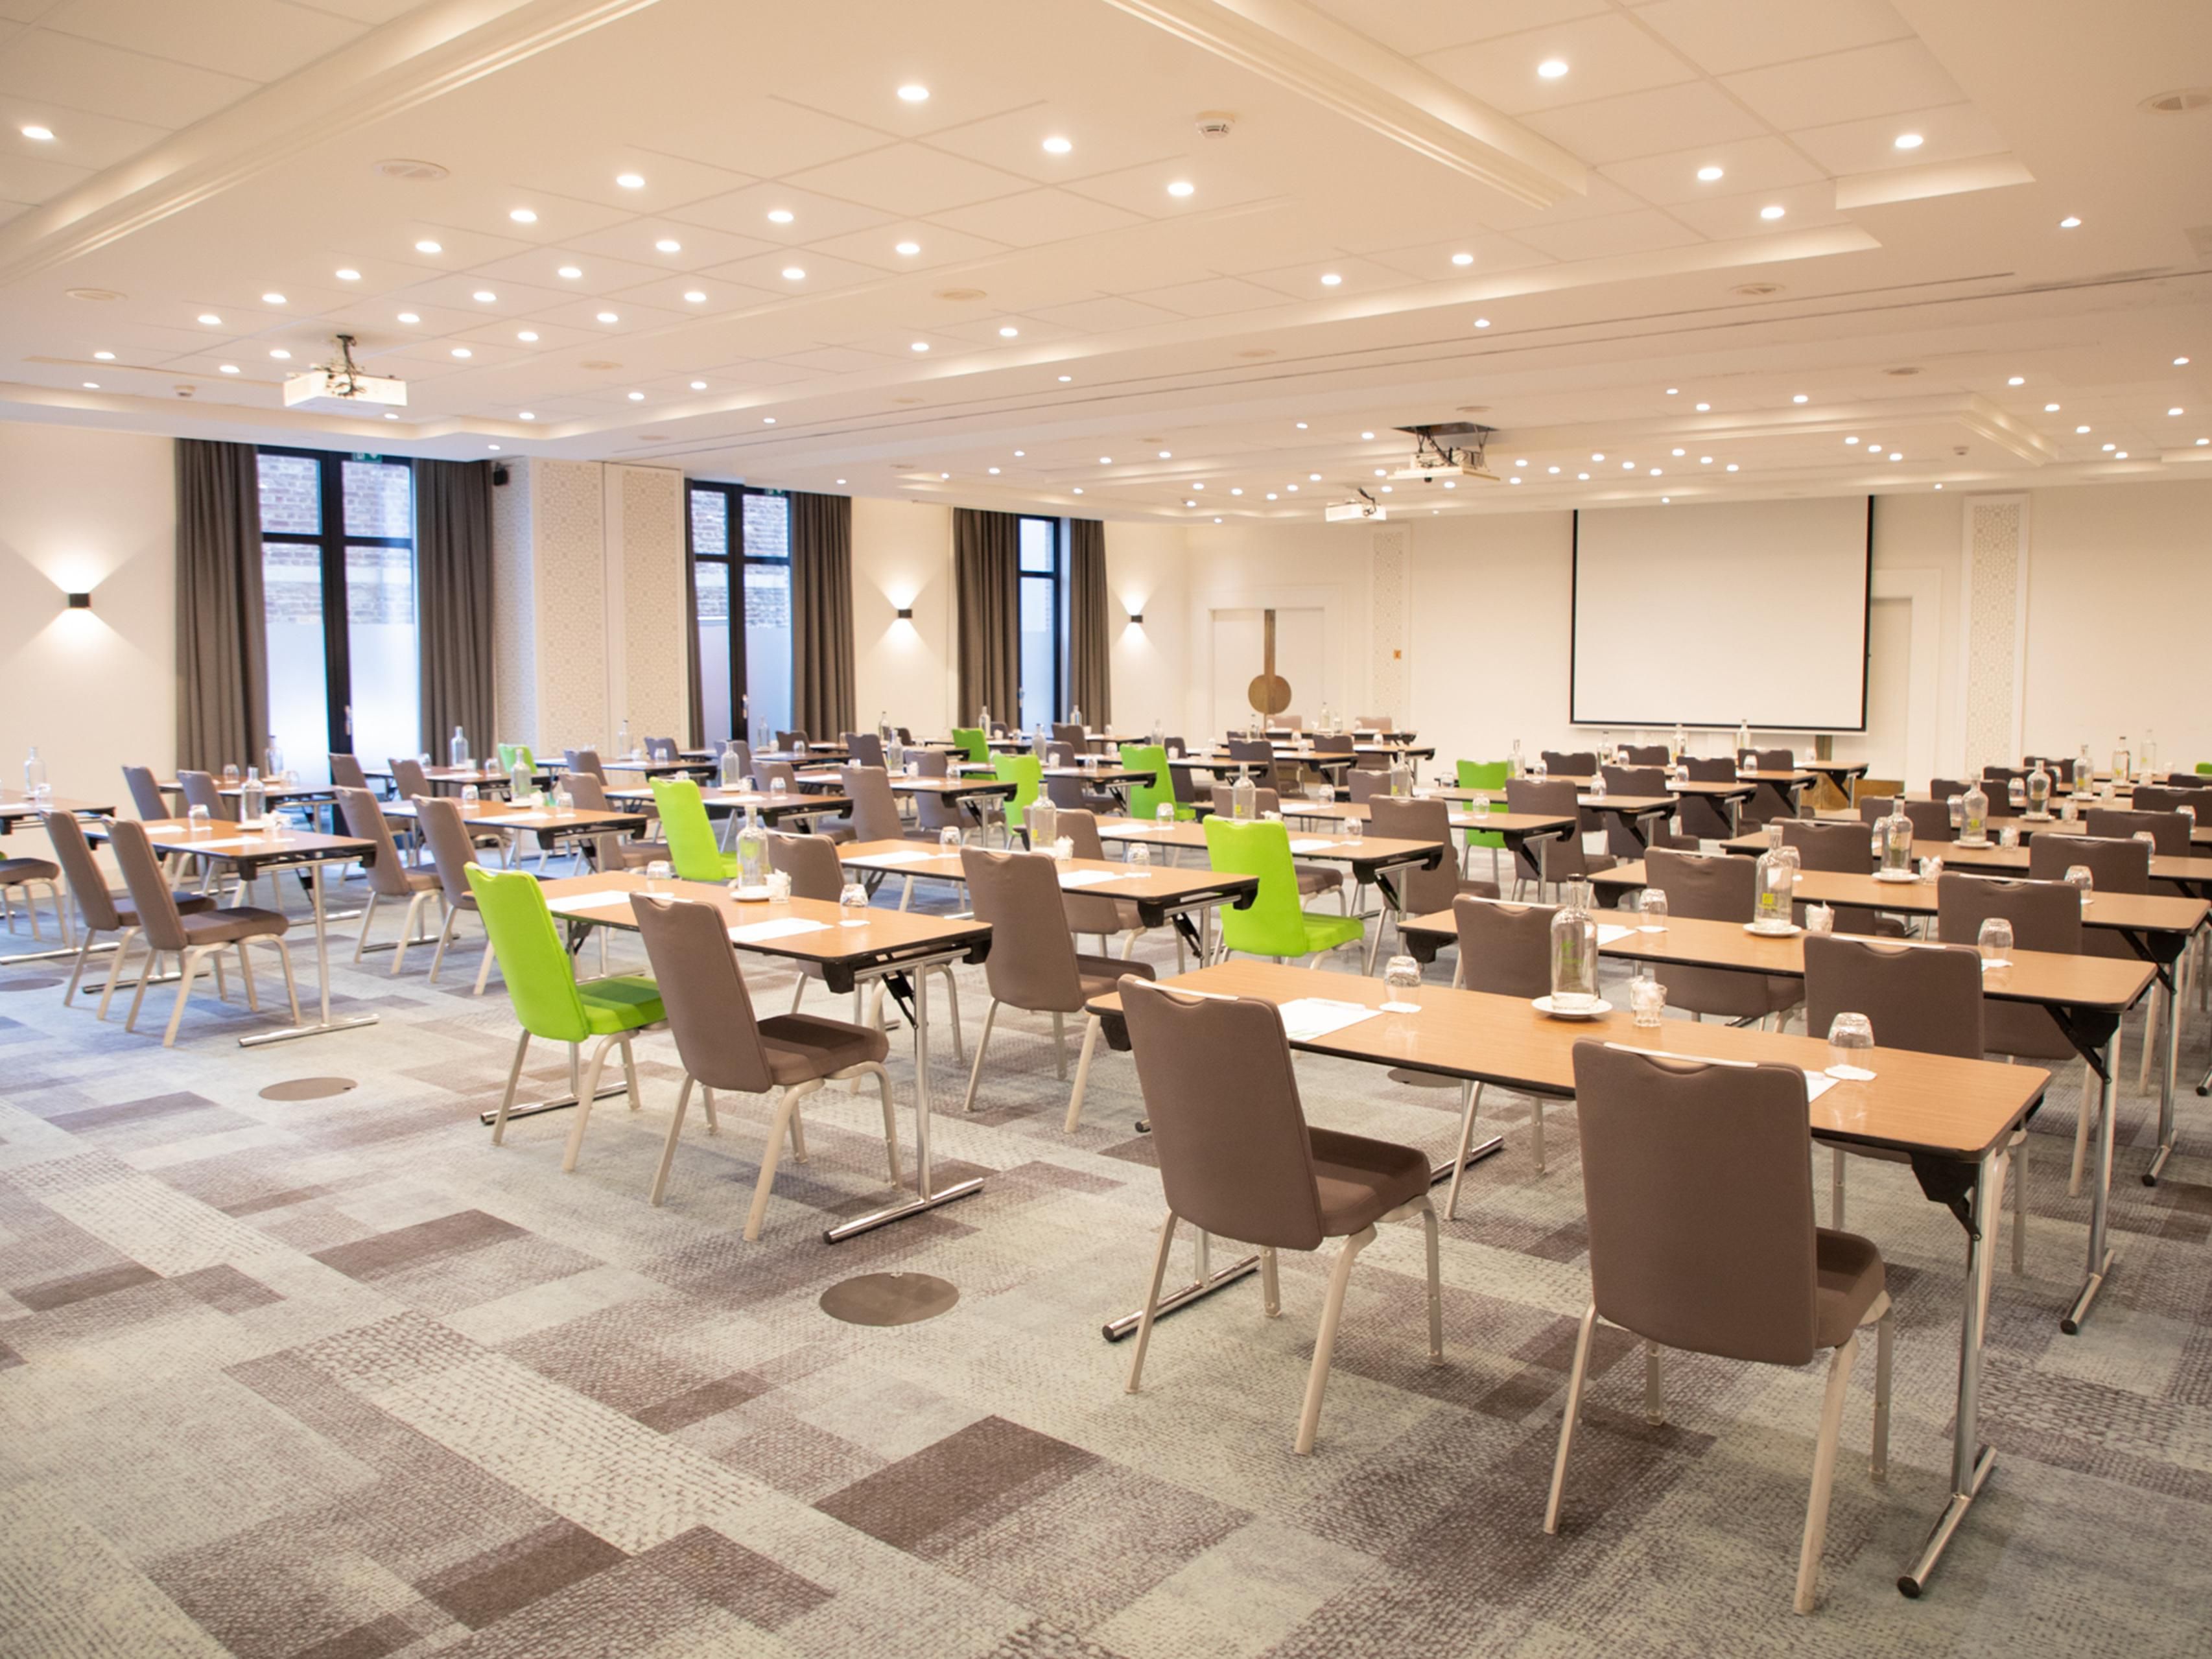 Discover the beauty of our five meeting rooms at Holiday Inn Hasselt, bathed in natural daylight and accommodating up to 250 participants. Enjoy free wireless internet throughout the entire hotel. Refreshing welcome coffee and delightful coffee breaks await you in our cozy foyer.